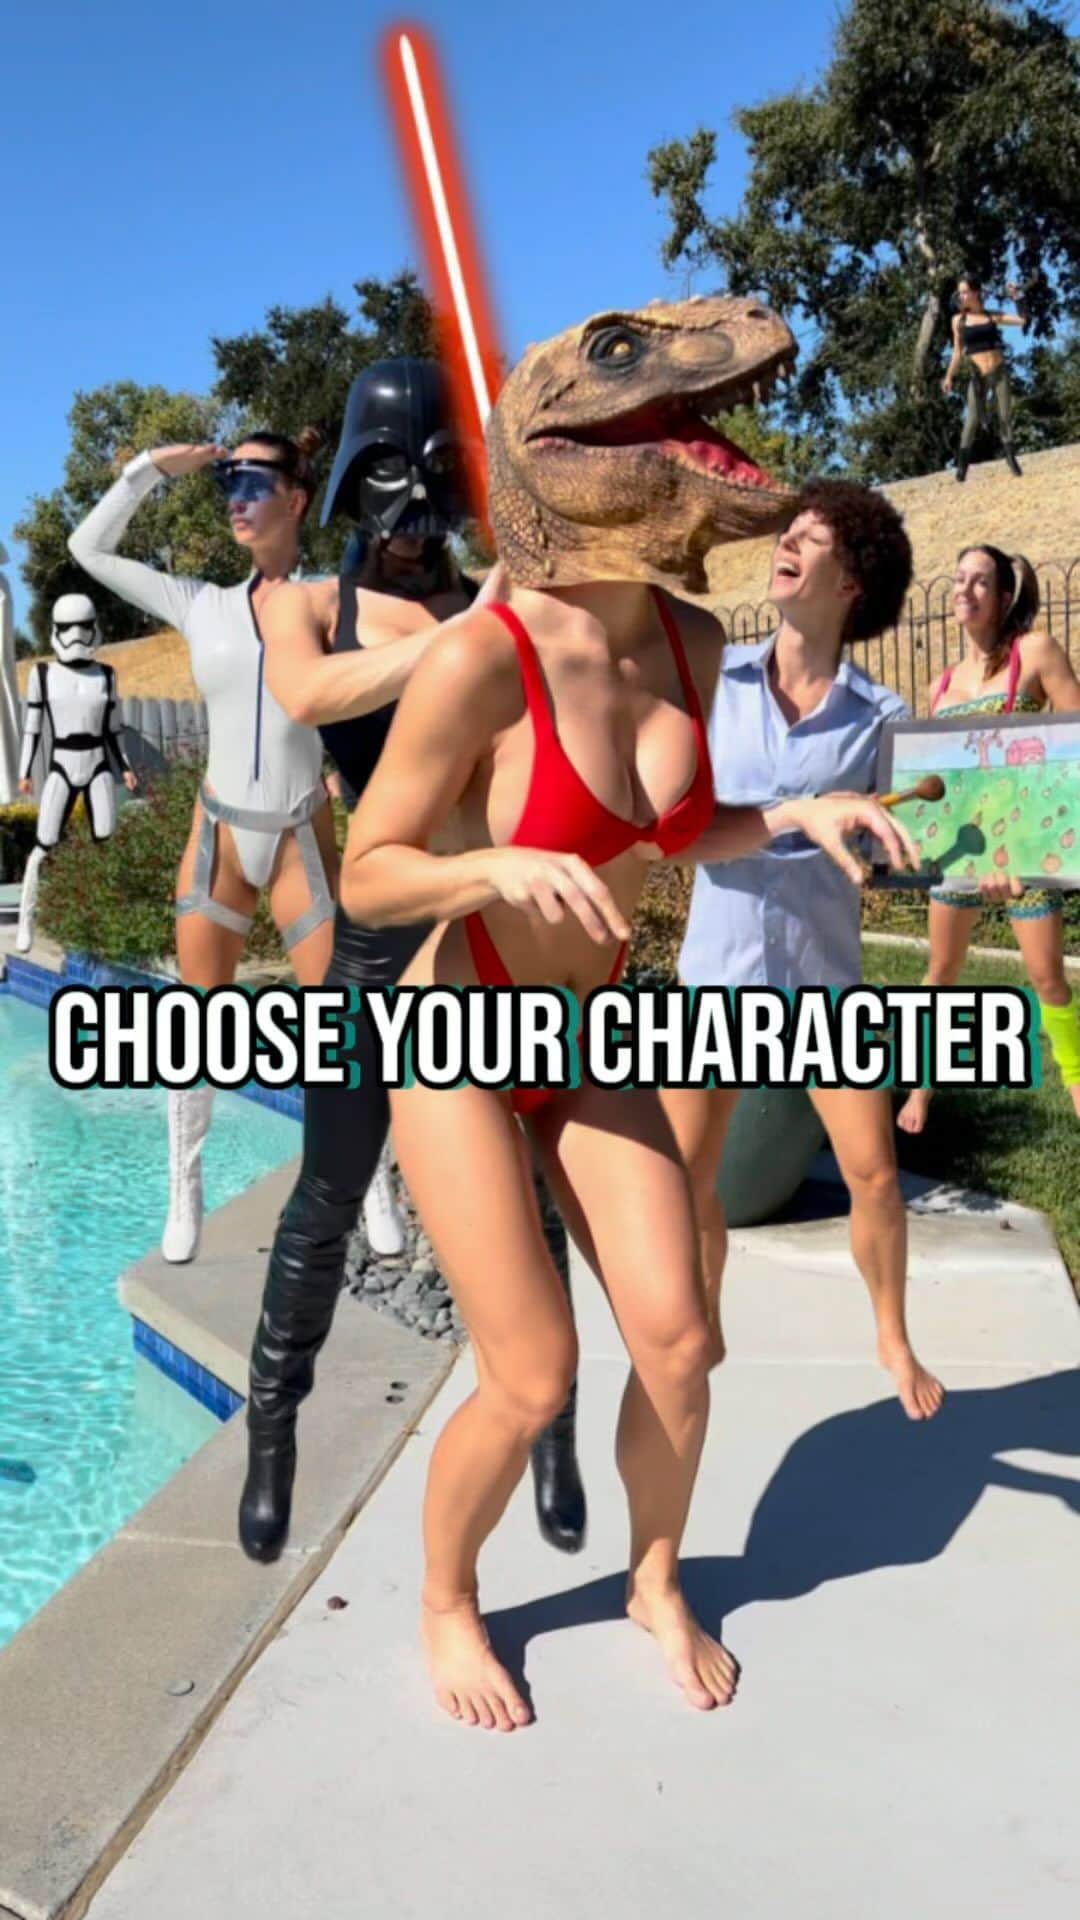 Janna Breslinのインスタグラム：「Choose your character 🤪  This was so much fun to make! Lol. To be honest though, this resembles my life a little too closely…  Jumping from athlete to homesteader to business owner… to archer to self-proclaimed IG comedian (apparently) 😂   My days are full of switching from one character to the next - but how else do we satisfy every side of our personality, right?   We all have our inner T-Rex, and may they receive just as much attention as our… well… more conventional sides 🤣  Remember, if you don’t fit neatly beneath a label, that’s a GOOD thing. Embrace it.   Your authenticity is badass. Hold onto that — Halloween or otherwise 😎  #Character #Funny #Inspiring #BeYourself」